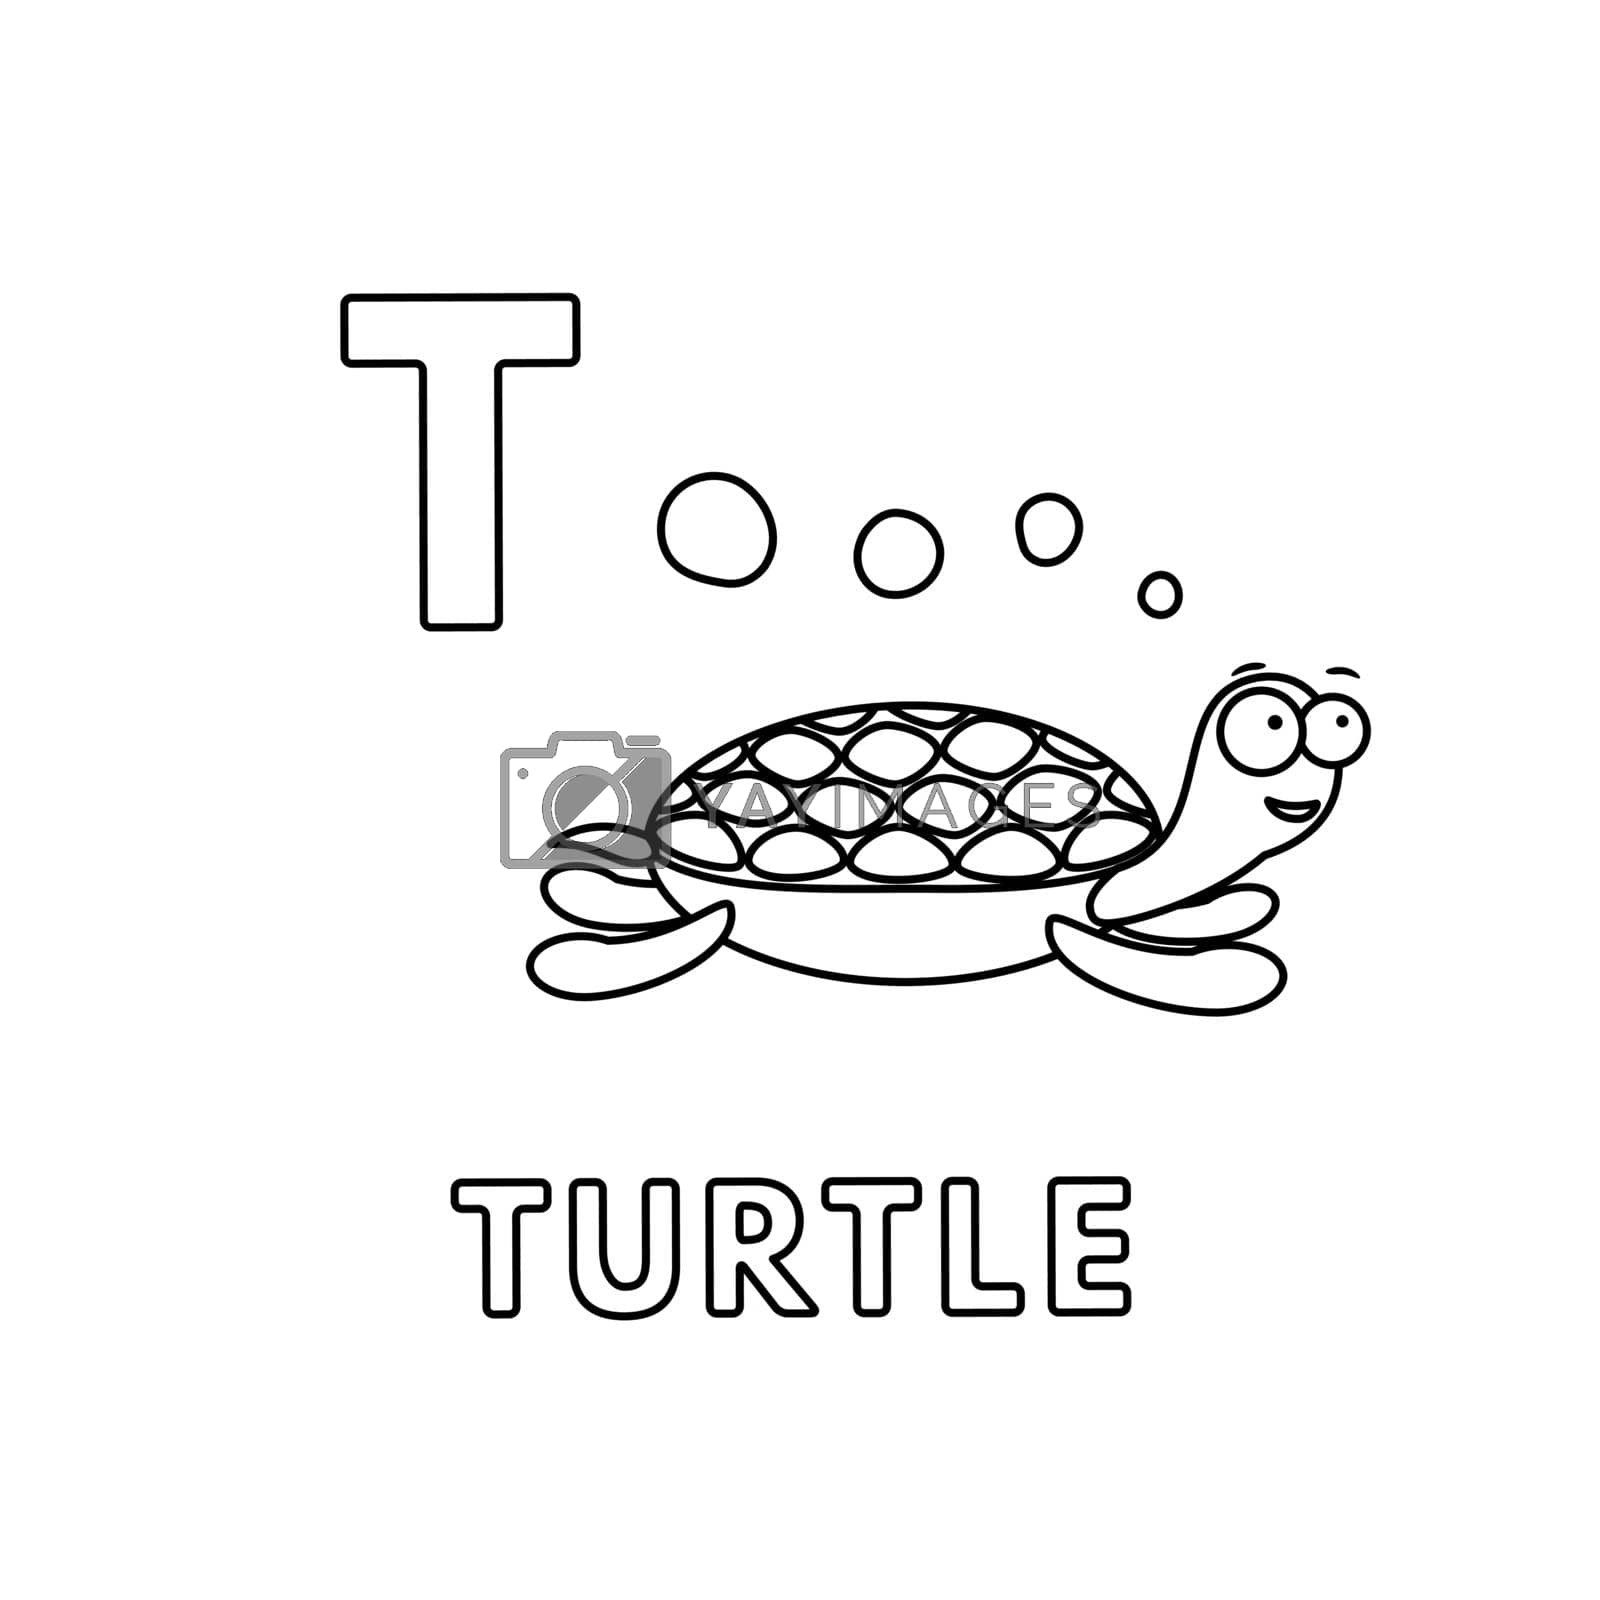 Alphabet with cute cartoon animals isolated on white background. Coloring pages for children education. Vector illustration of turtle and letter T